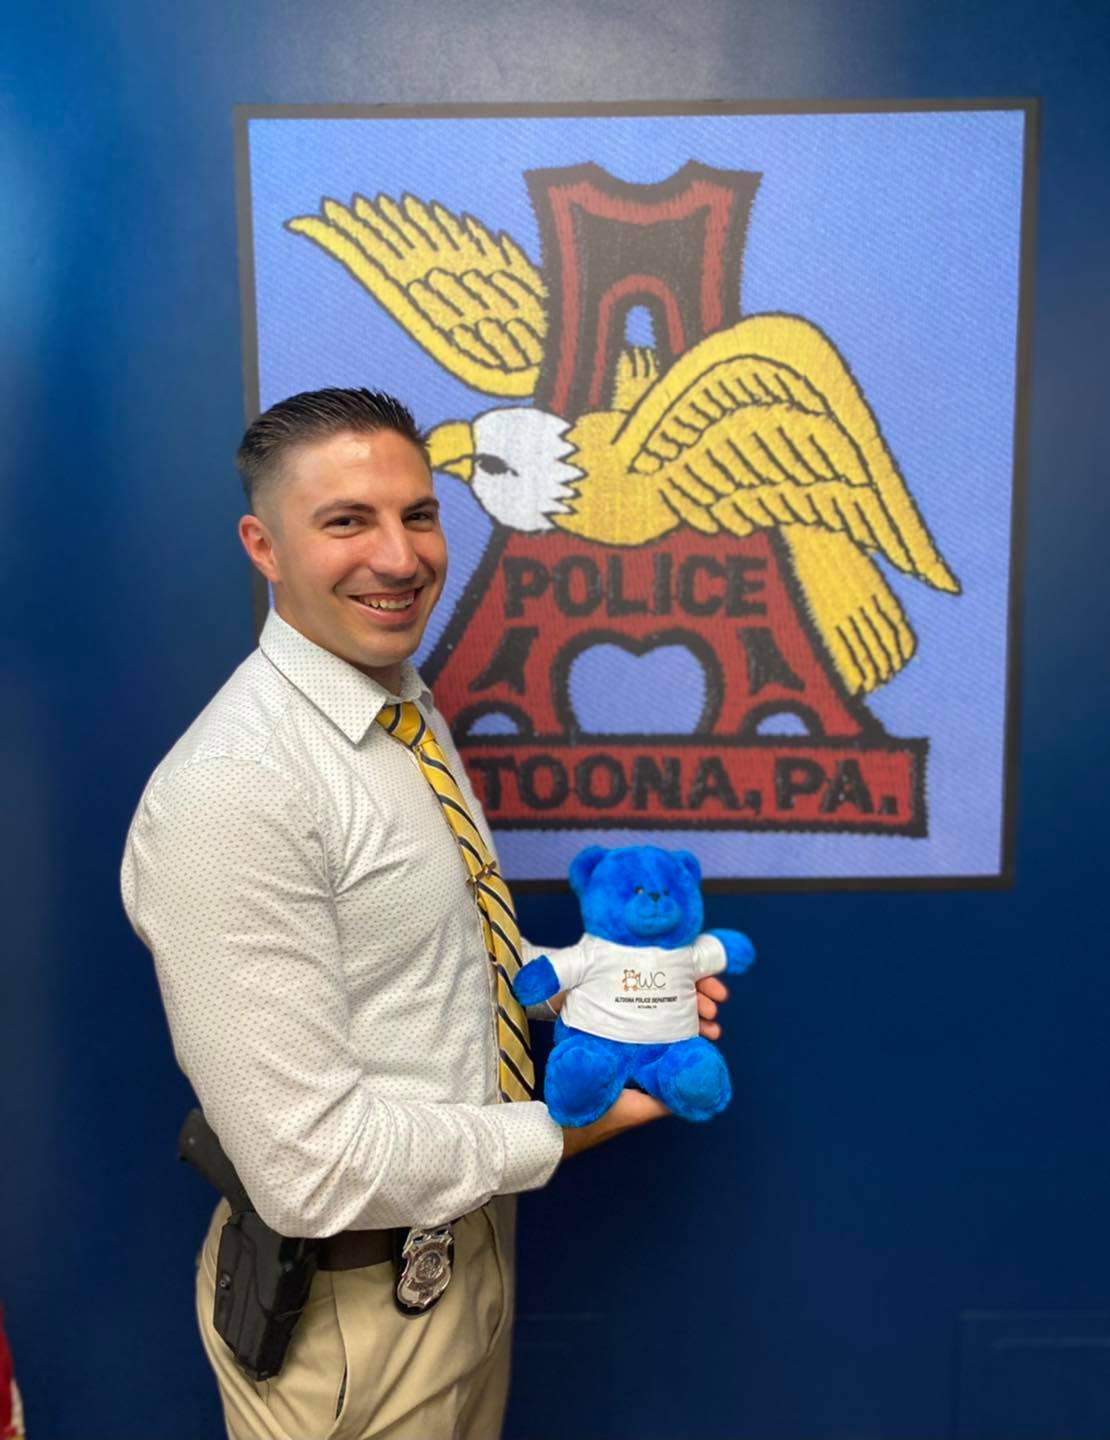 APD officer posing with a stuffed BWC bear.